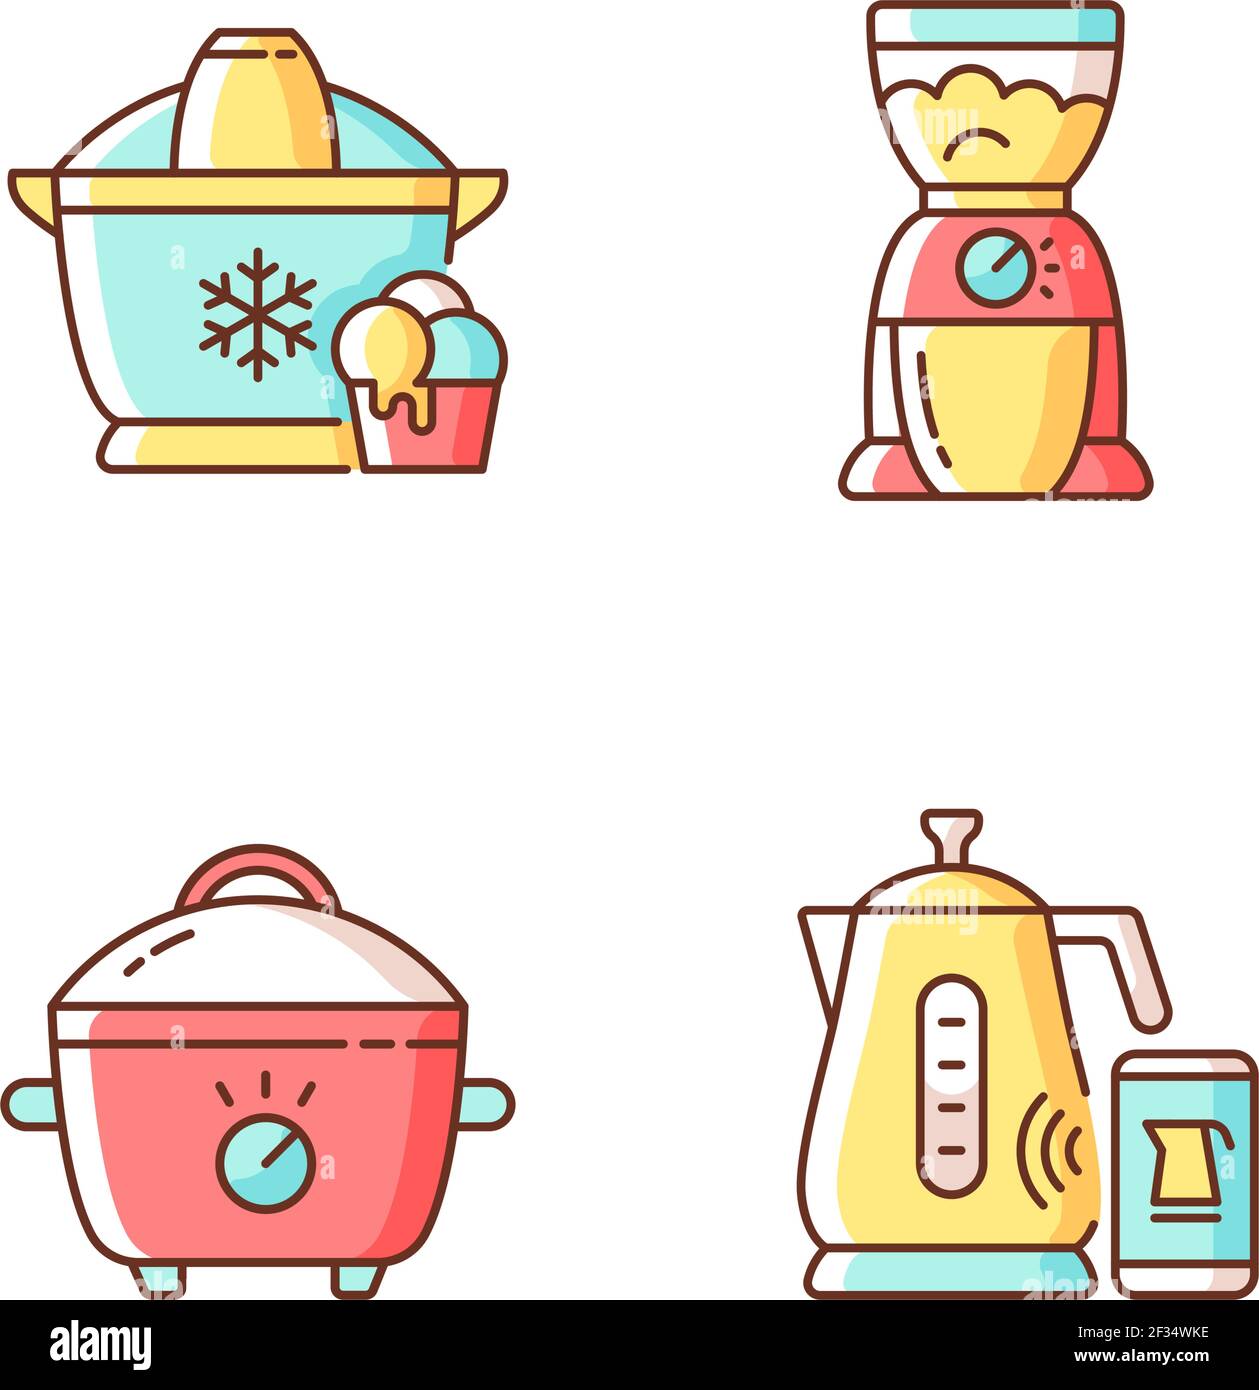 Slow Cooker Rgb Color Icon Stock Illustration - Download Image Now